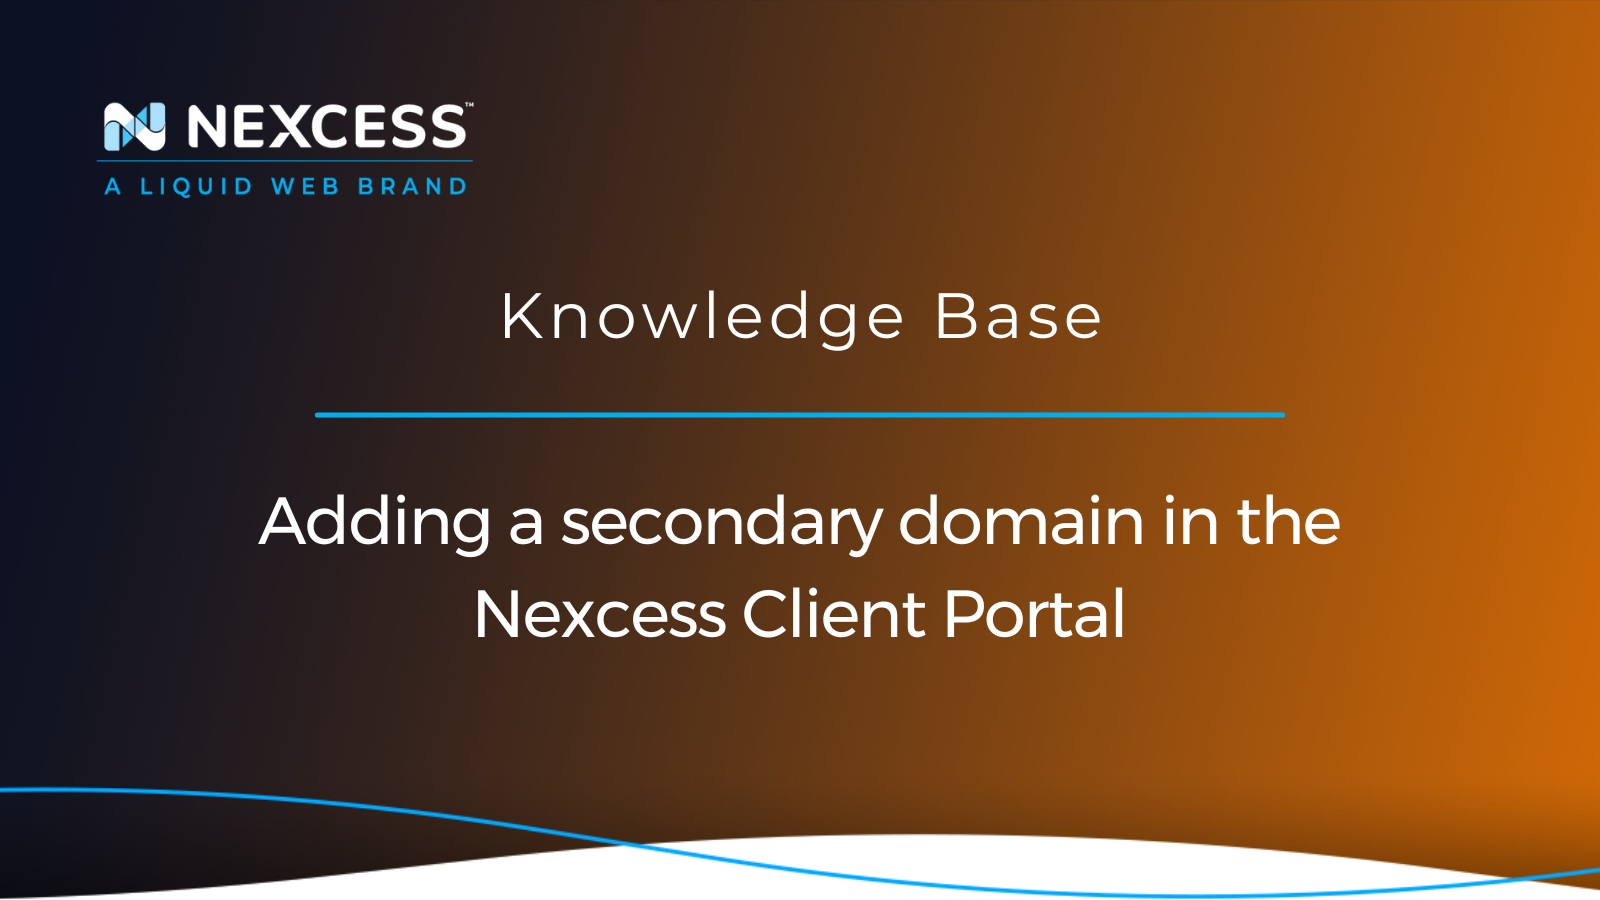 Adding a secondary domain in the Nexcess Client Portal